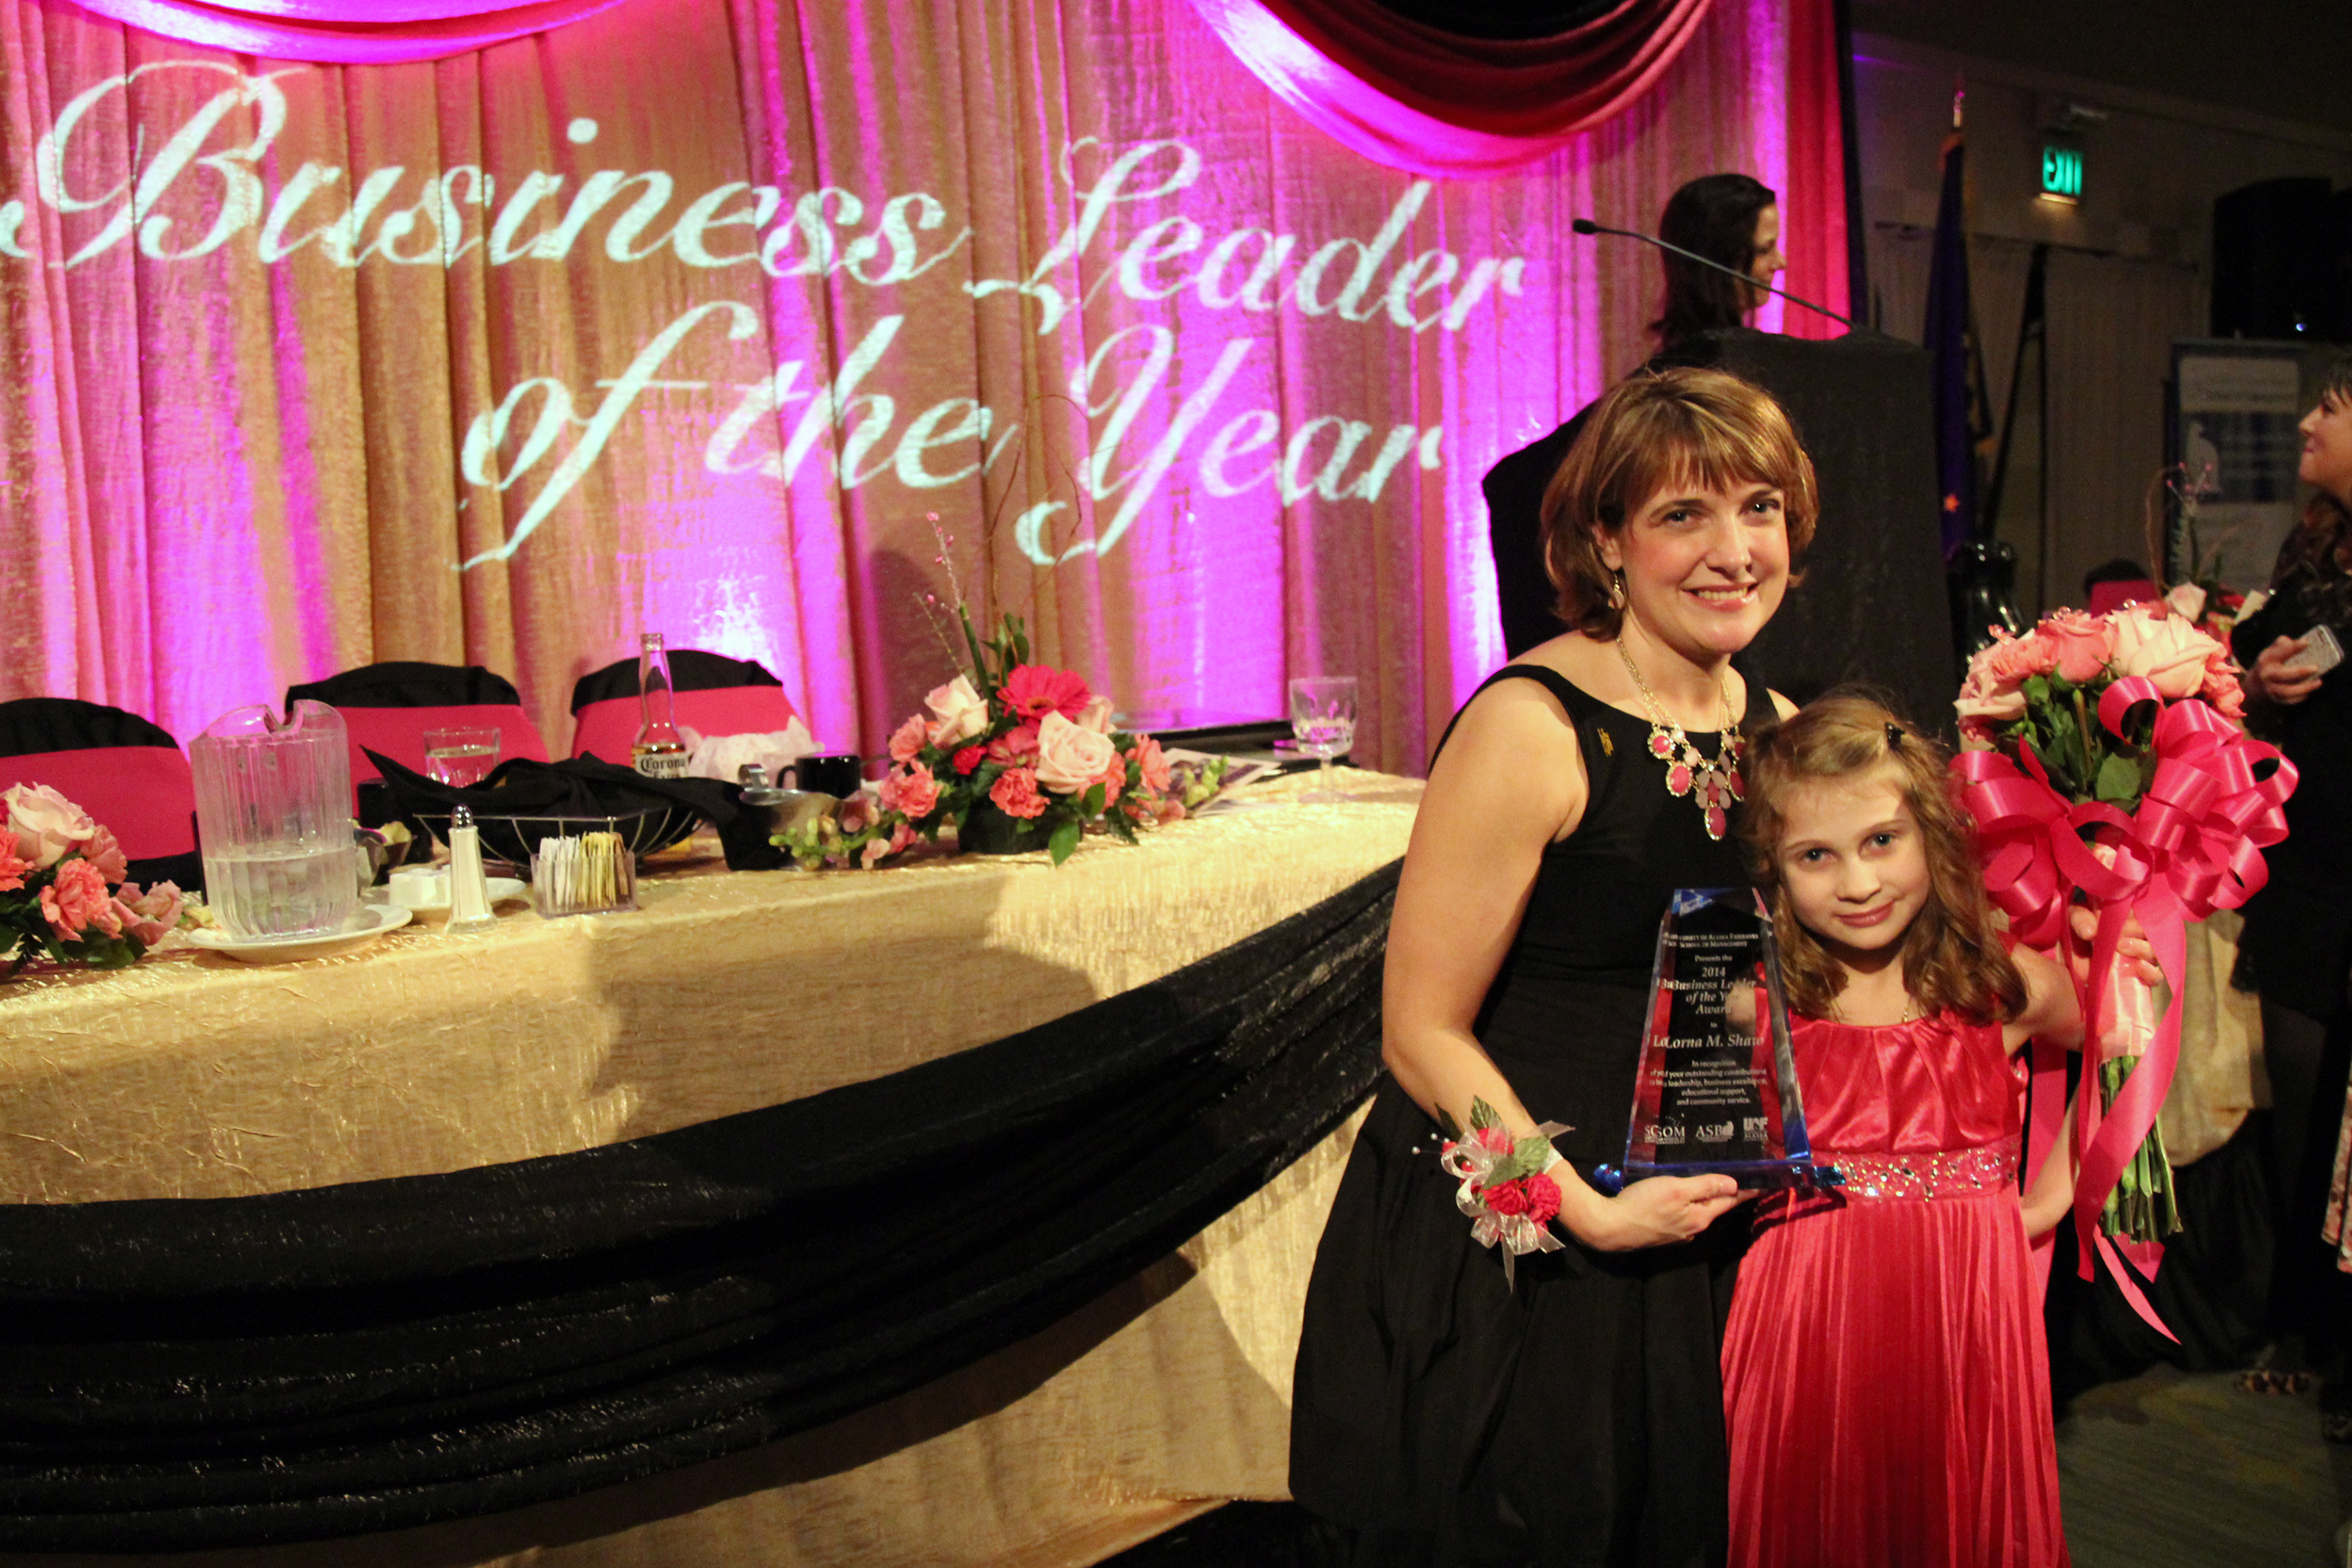 A woman in a dress stands before a stage table and holds an award, while embracing with one arm a young girl holding flowers. The words "Business Leader of the Year" are projected onto a pink stage curtain behind her.  